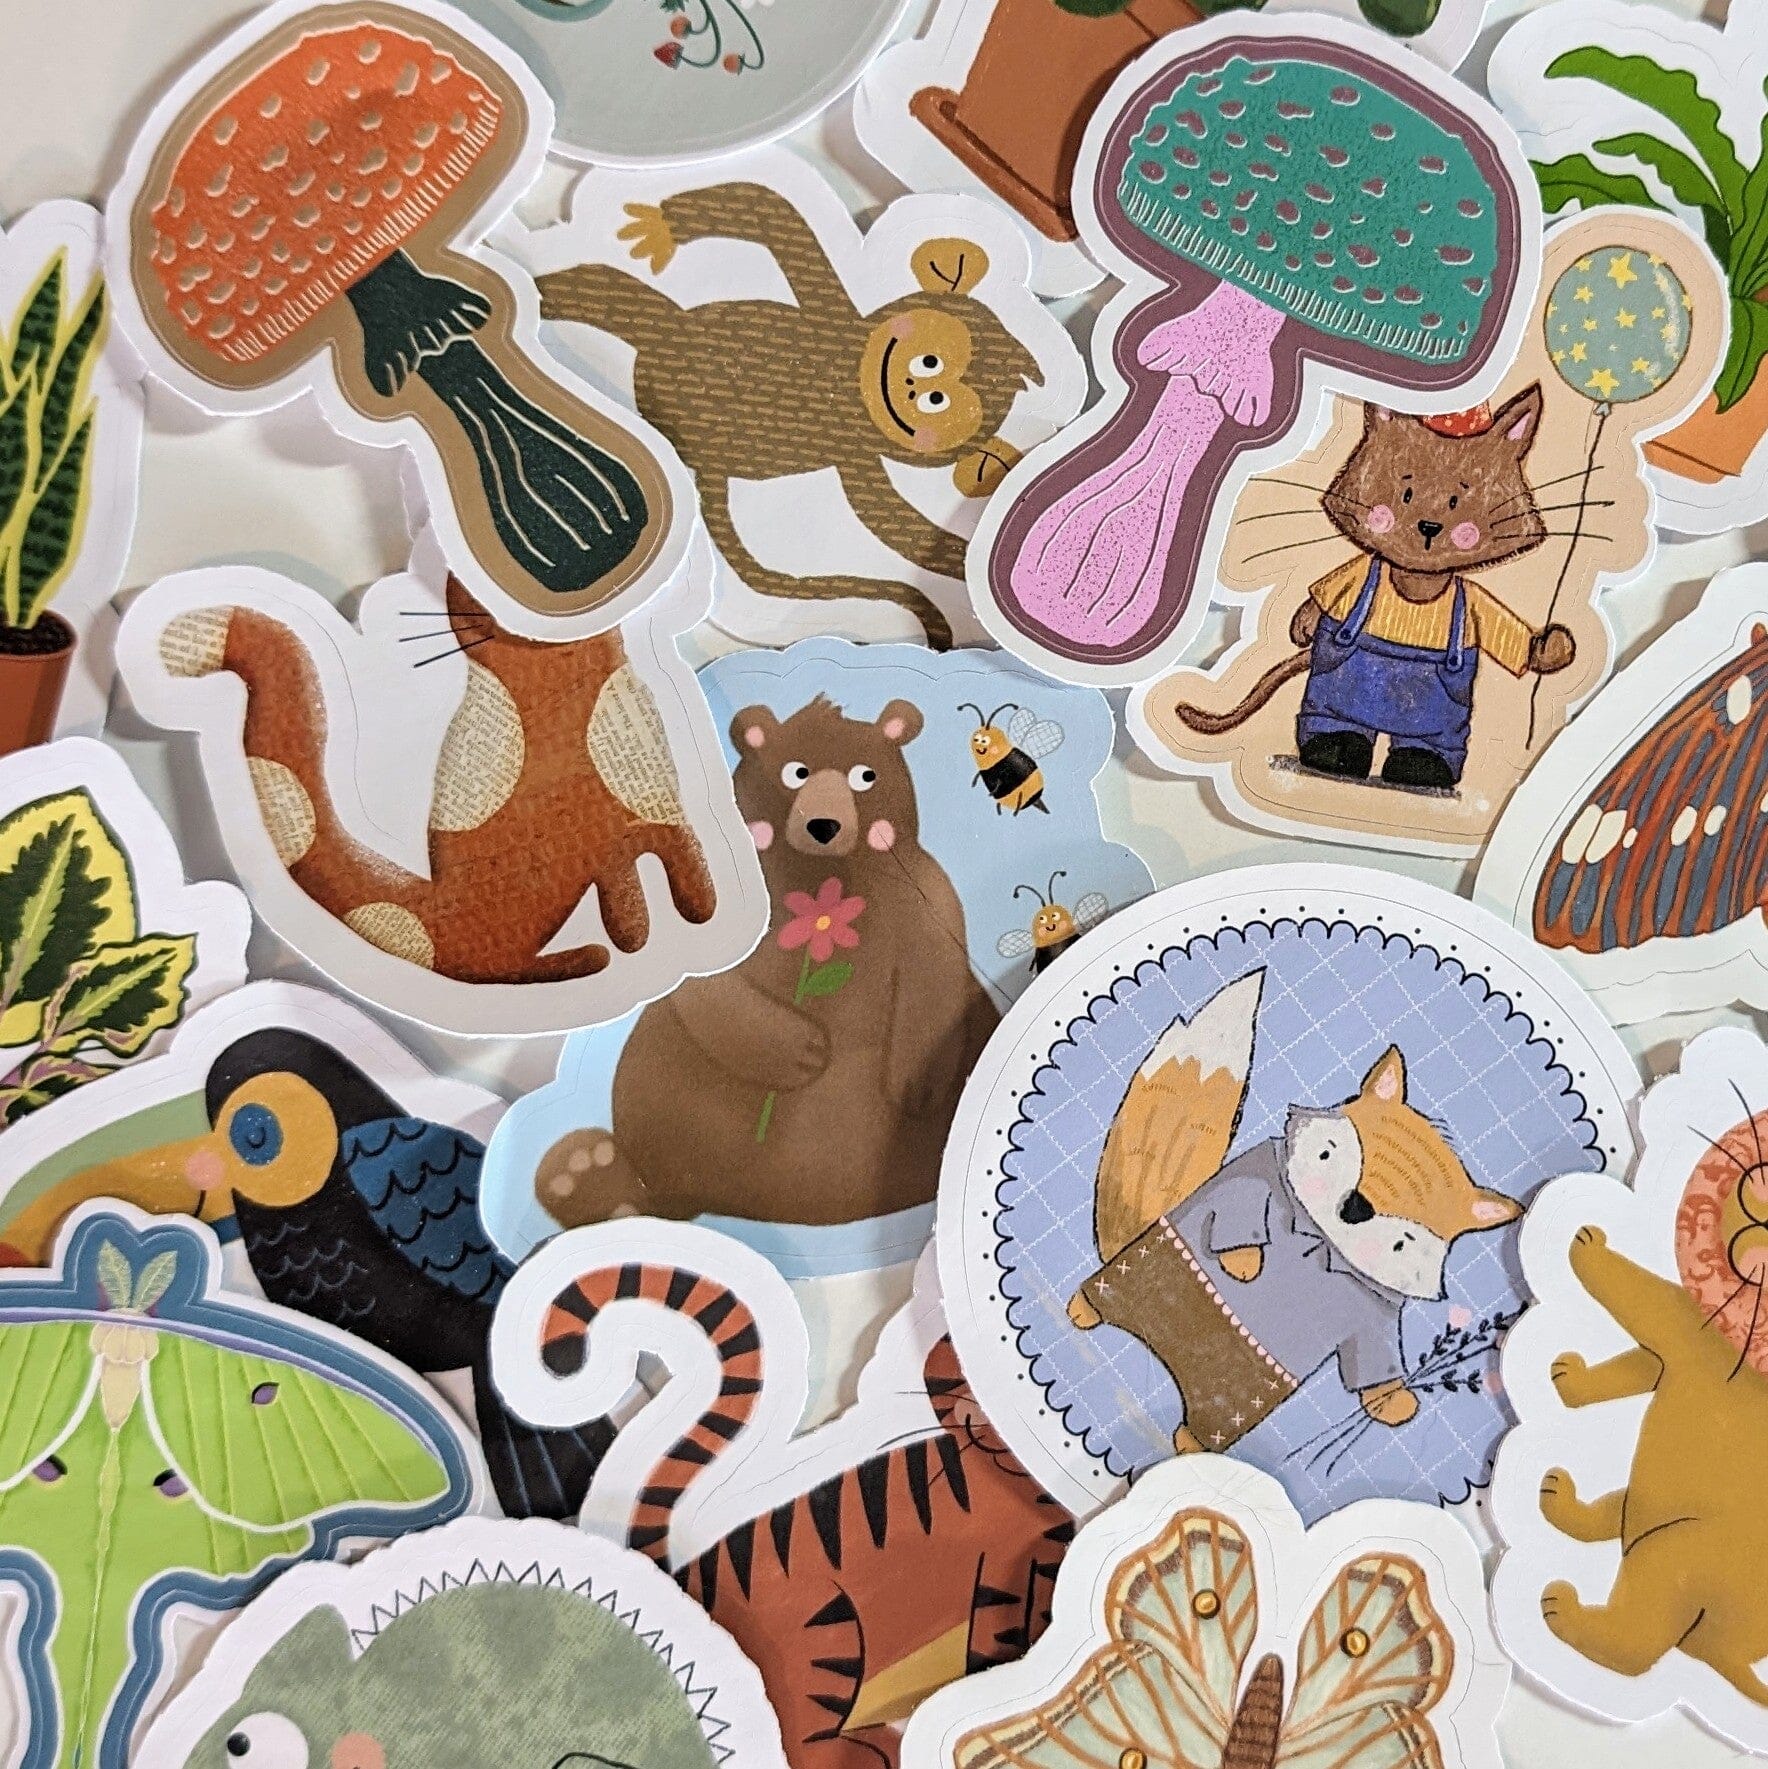 A photo of a huge assortment of cute die-cut glossy and matte waterproof vinyl stickers featuring mushrooms, cats, bears, foxes, monkeys, plants, butterflies, lions, toucans, iguanas, and tigers.